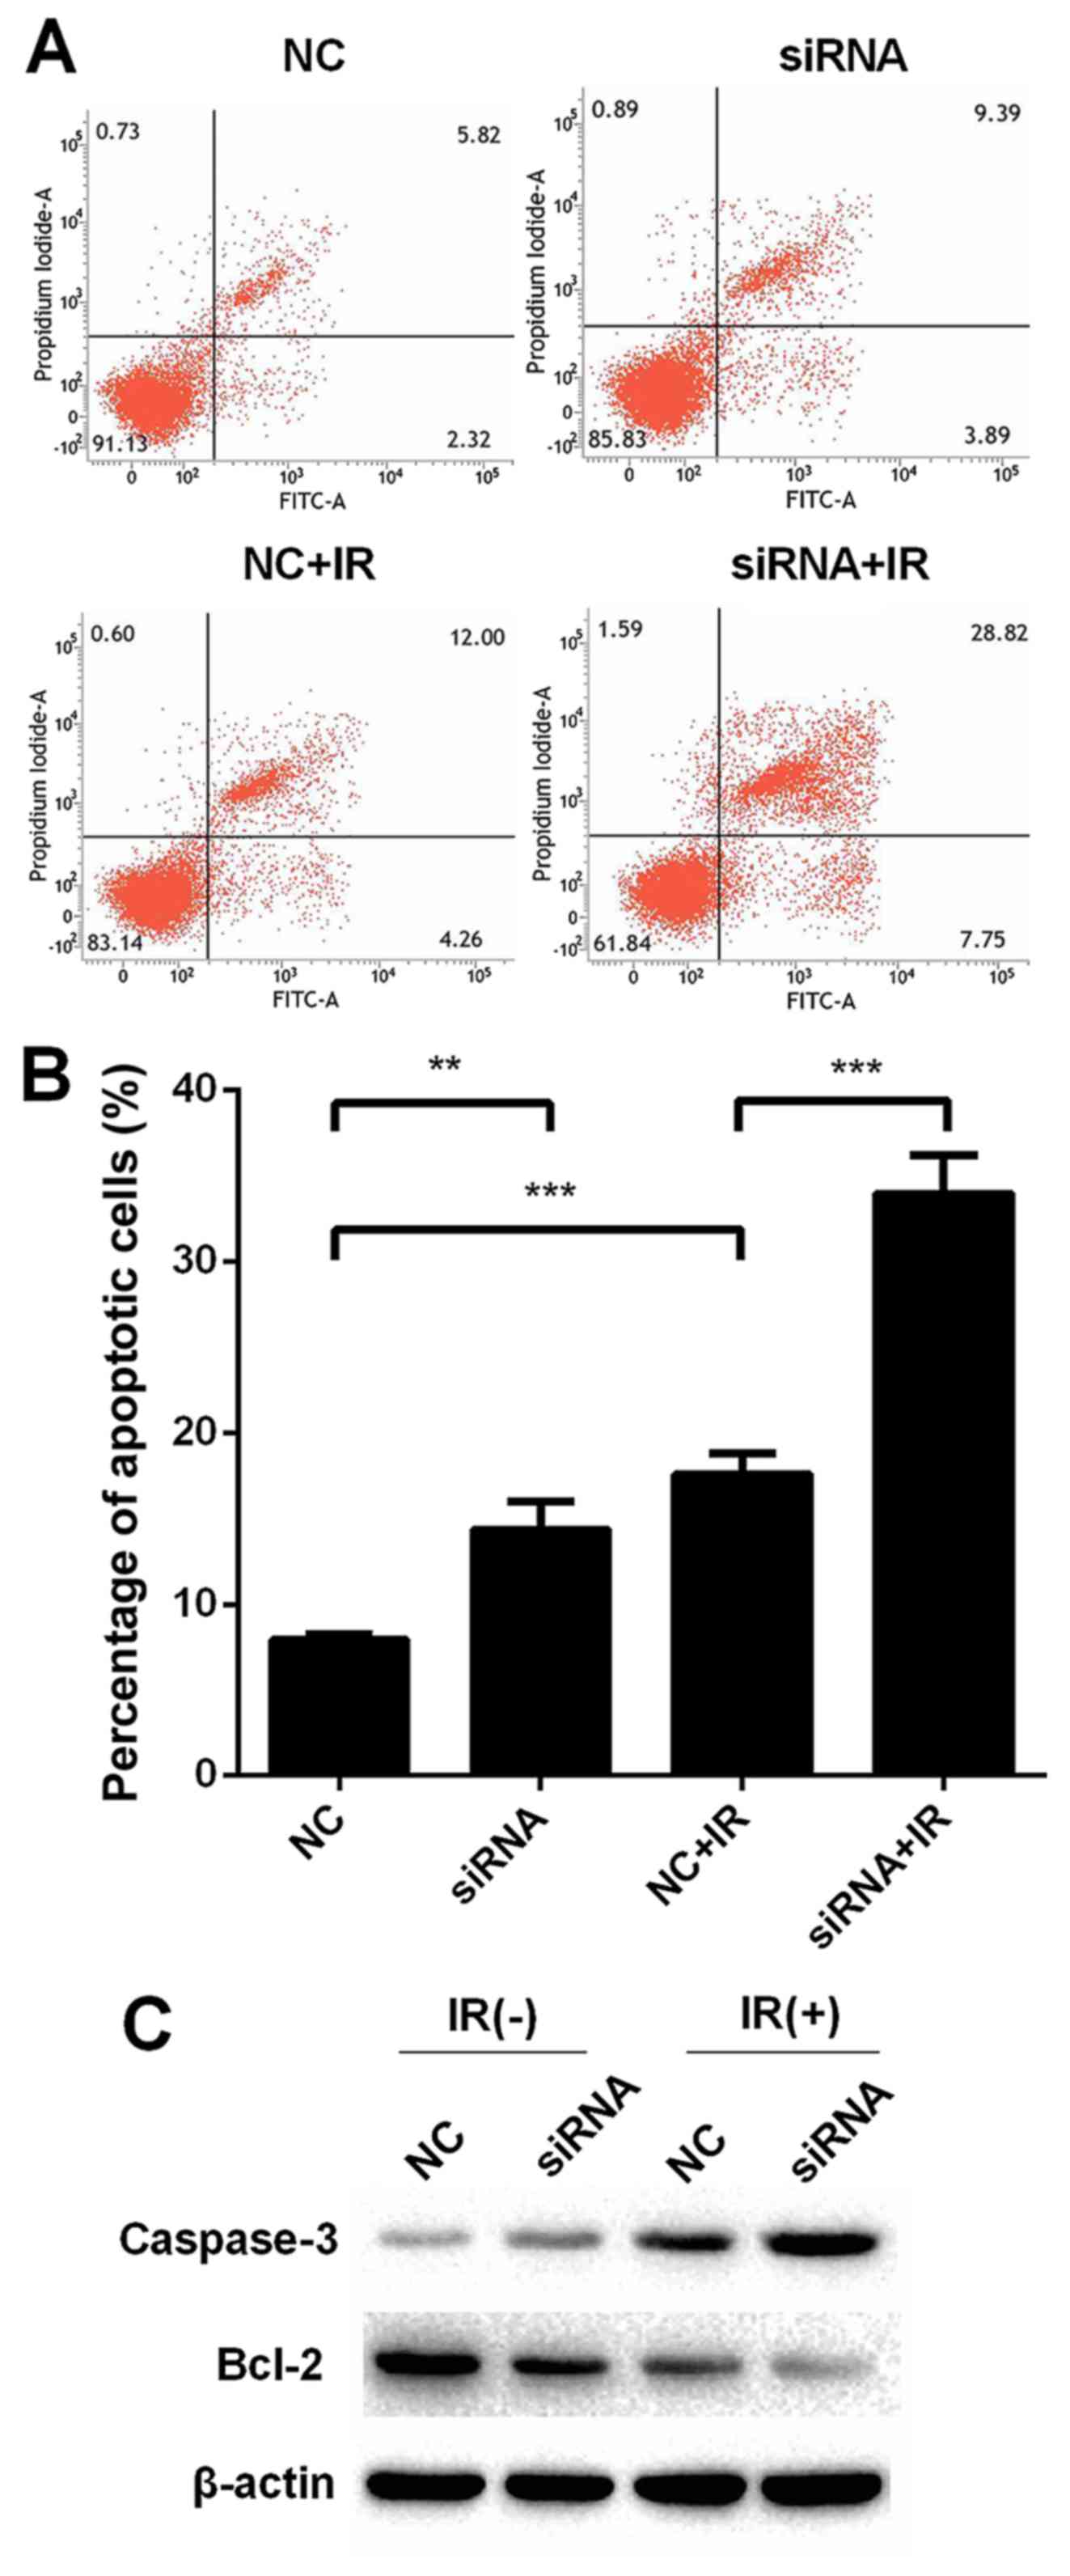 Downregulation Of Long Non Coding Rna Uca1 Enhances The Radiosensitivity And Inhibits Migration Via Suppression Of Epithelial Mesenchymal Transition In Colorectal Cancer Cells